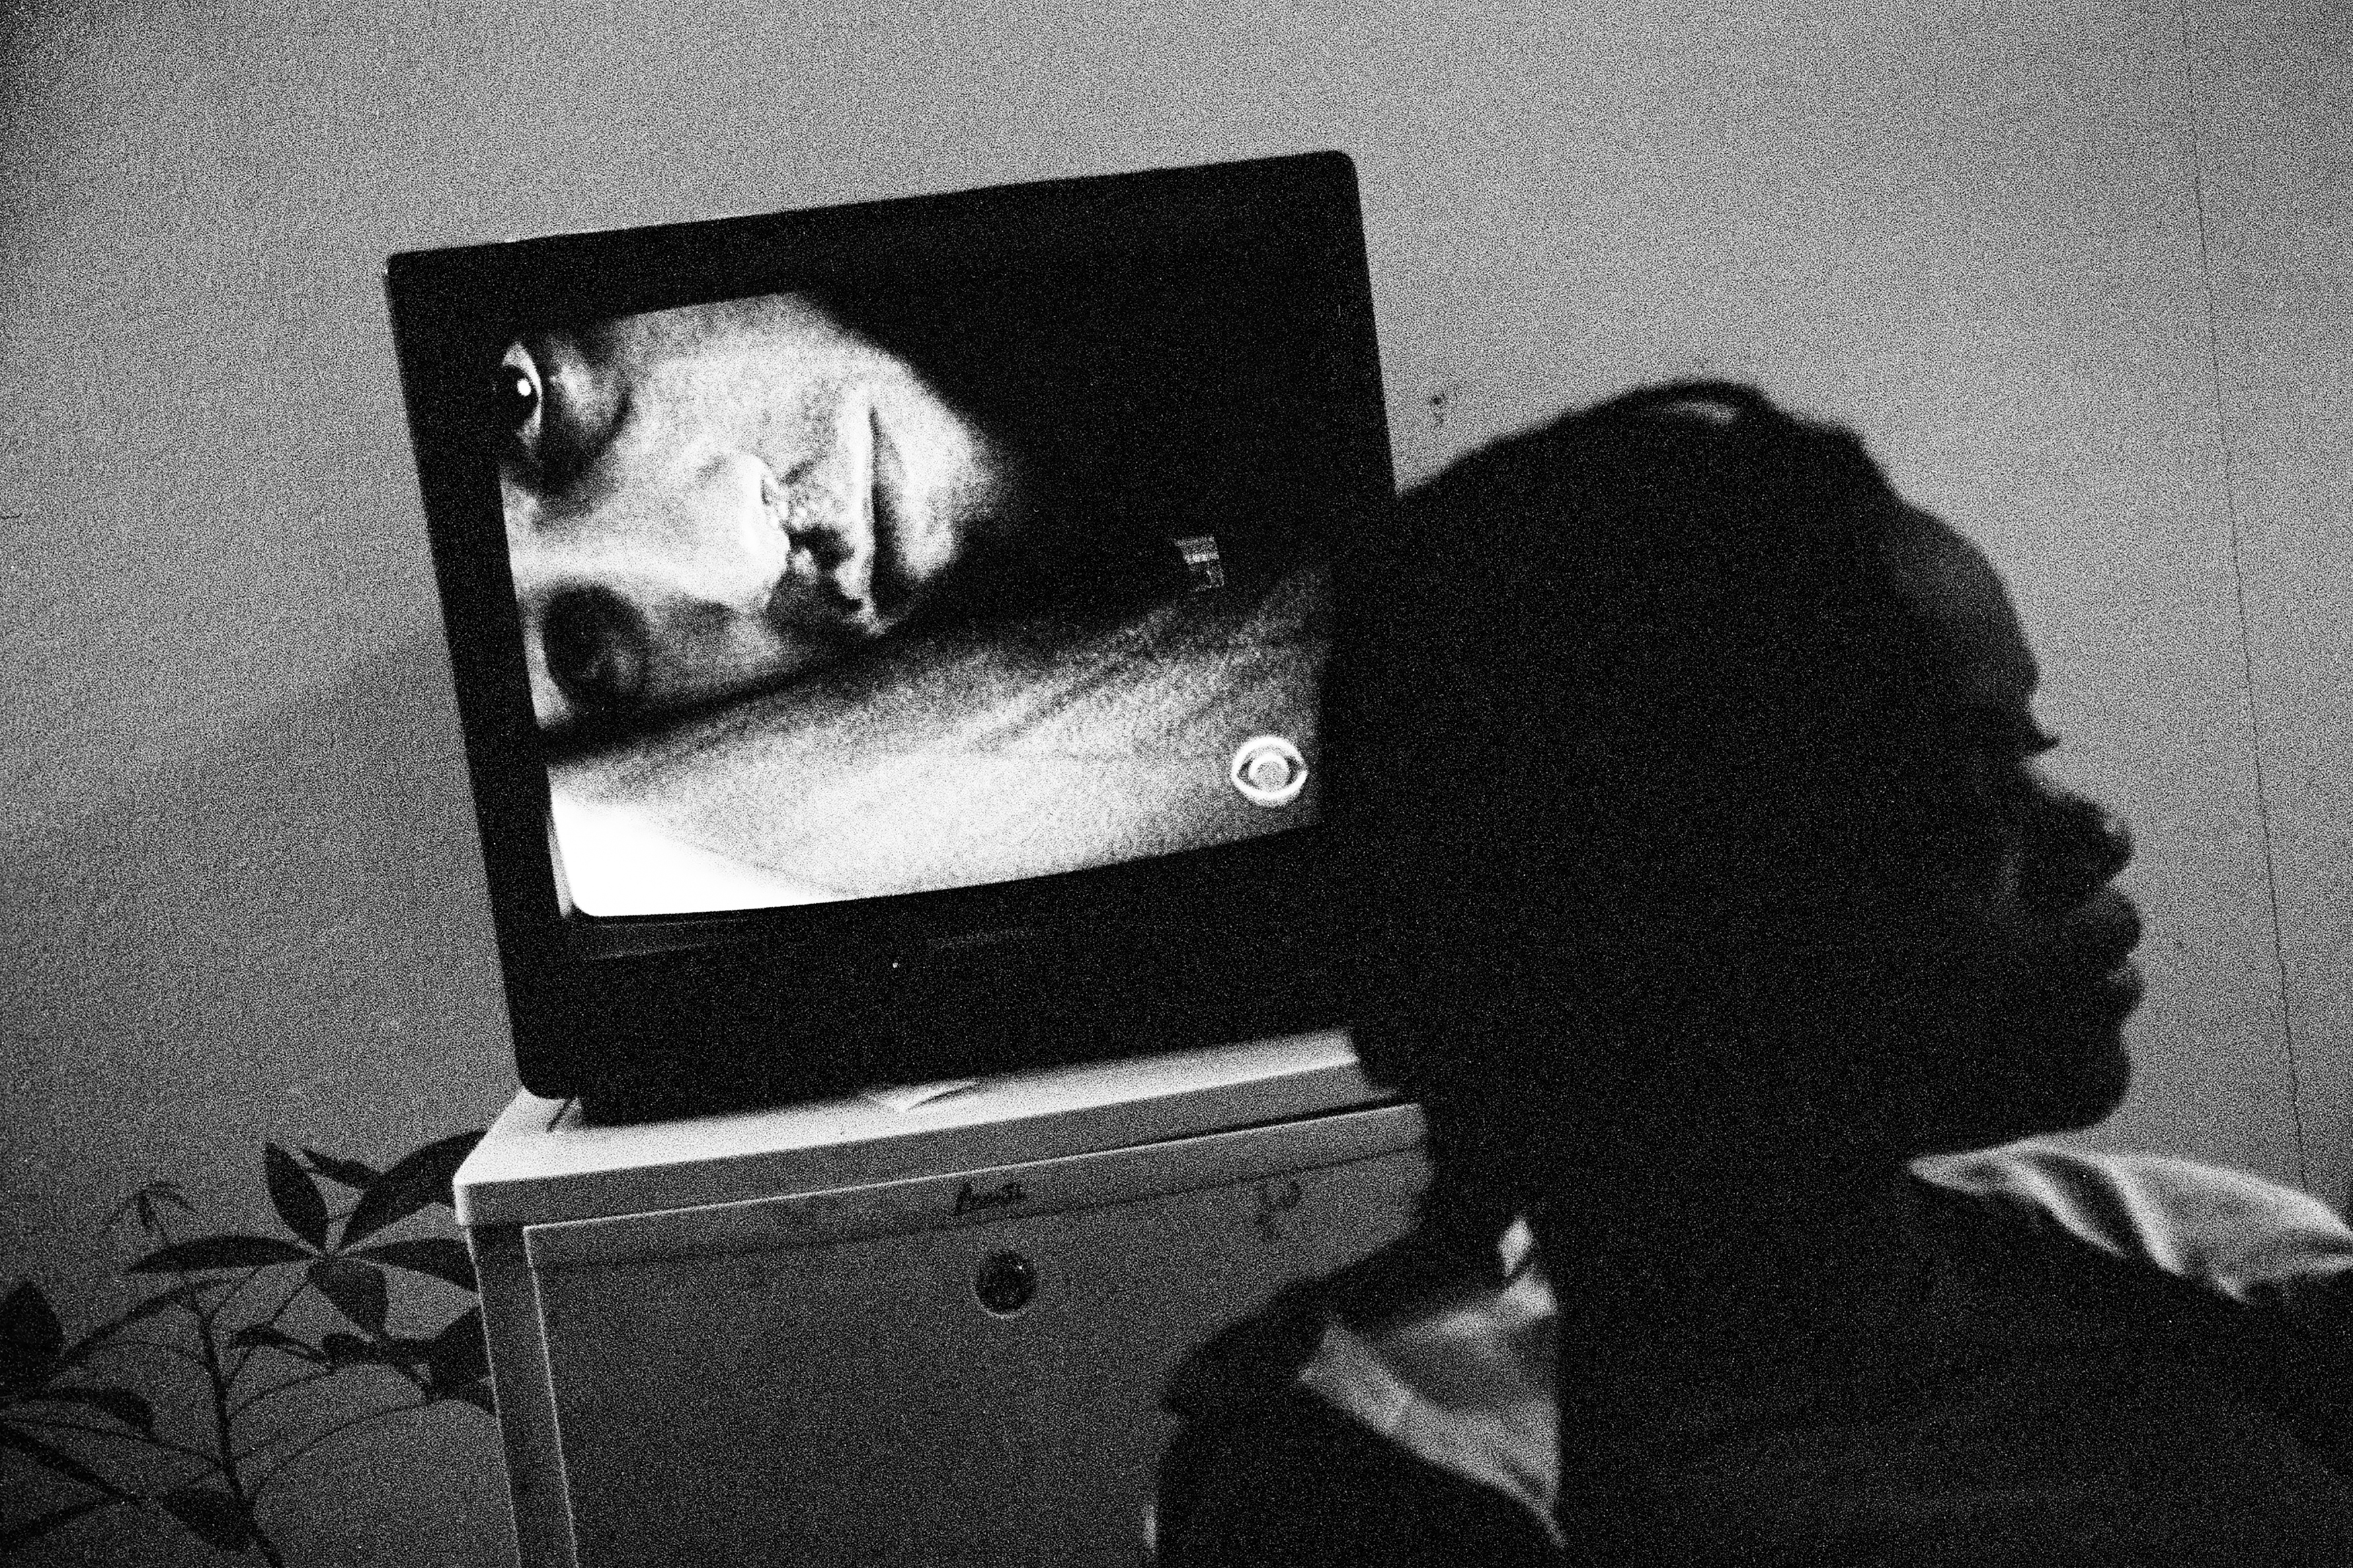 Alexandra Hobbes, blind since the age of four because of domestic violence, listens to the television in the apartment where she lives with her husband Elijah Hobbes, albino and visually impaired. The blind listen to television and hope for a device that more fully describes scenes so they can enjoy the programs on the same level as the hearing impaired. New York, NY. April 16, 2012